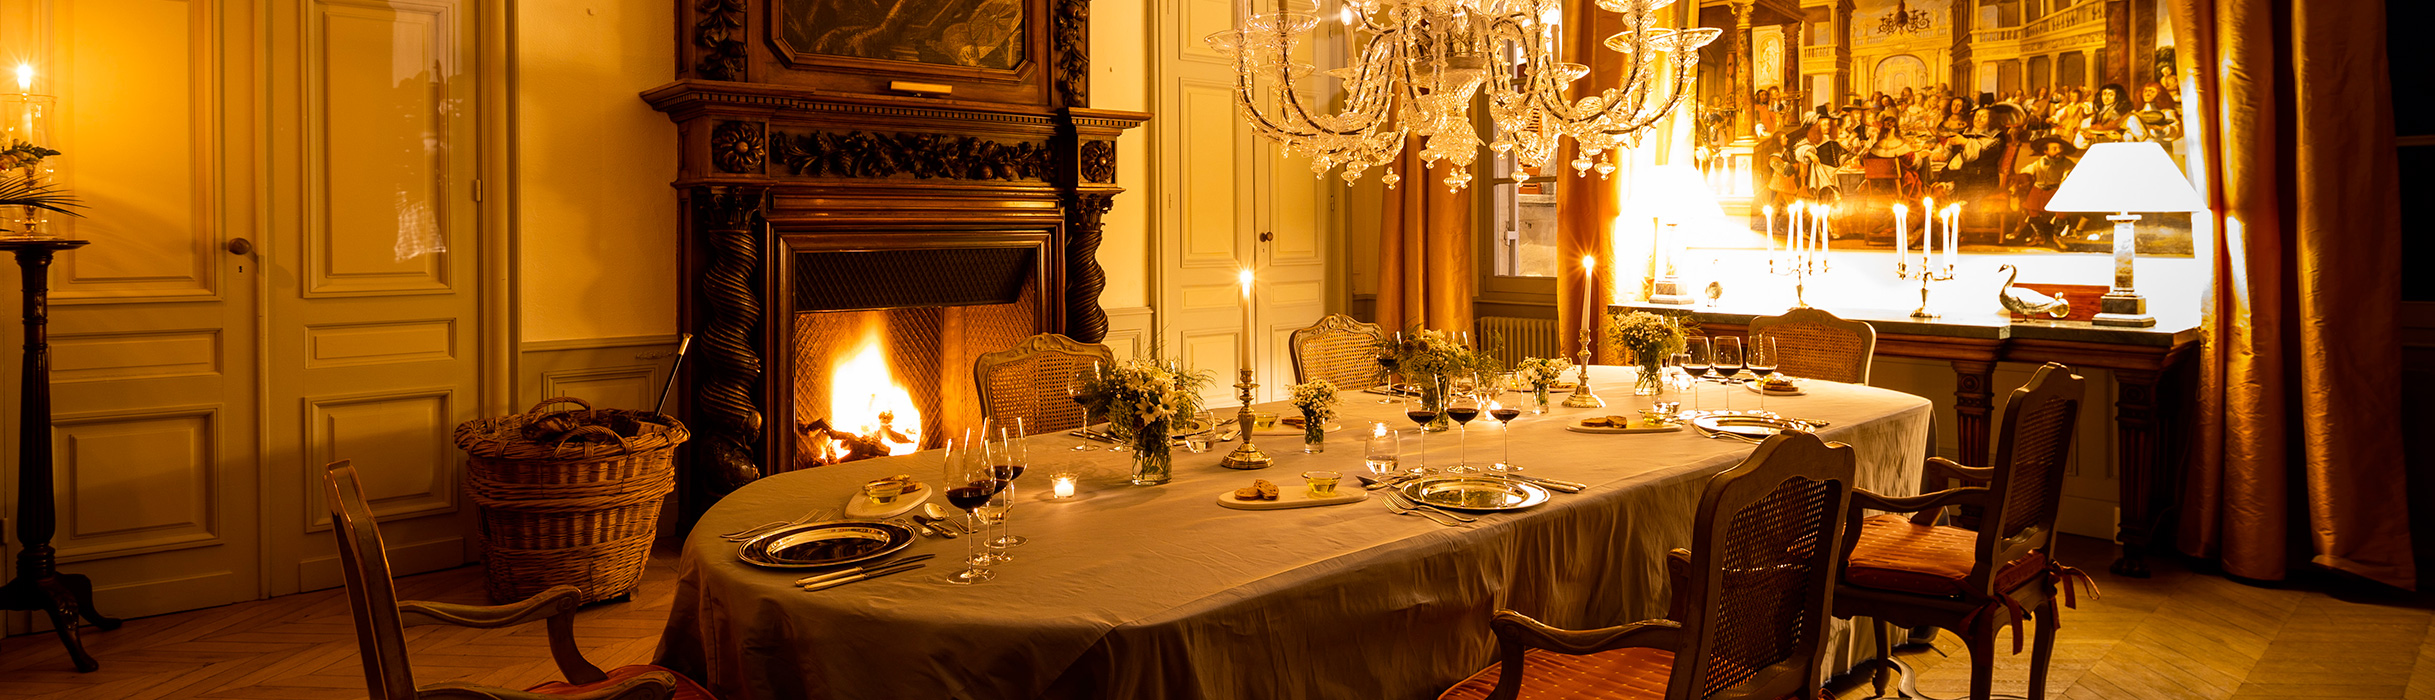 La Table de Giscours and its welcoming fireplace